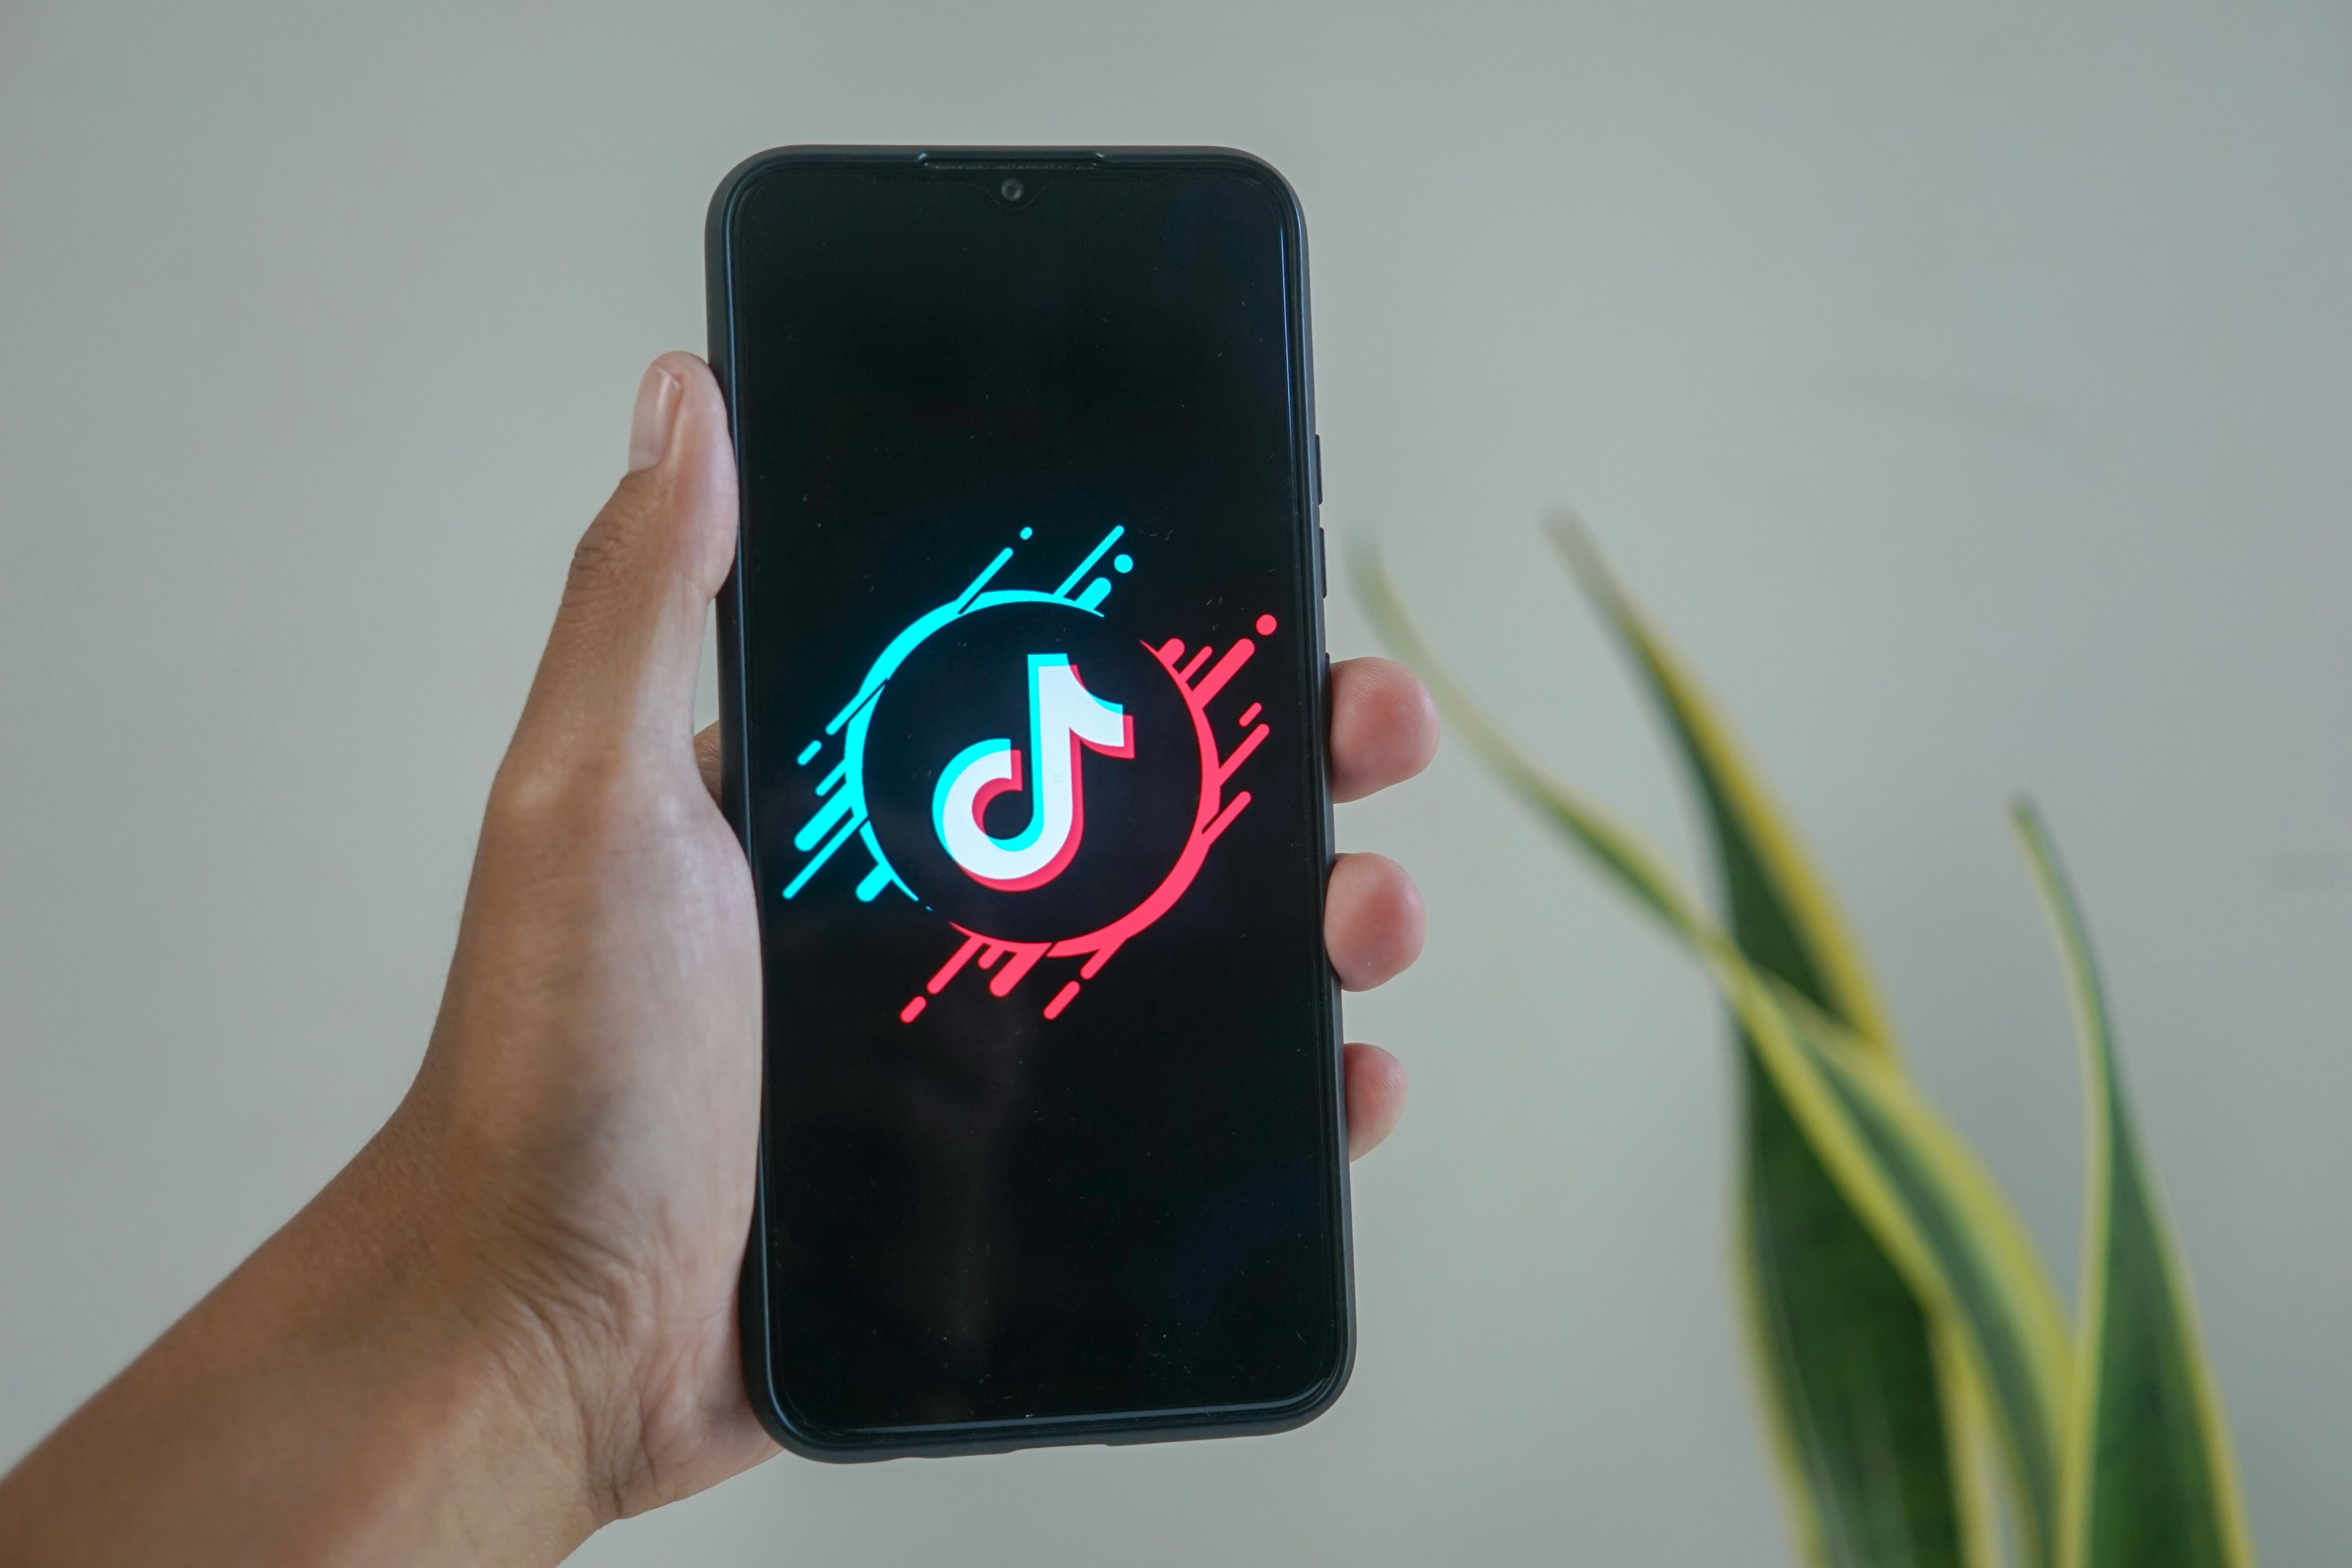 TikTok is testing an AI-powered song generation feature